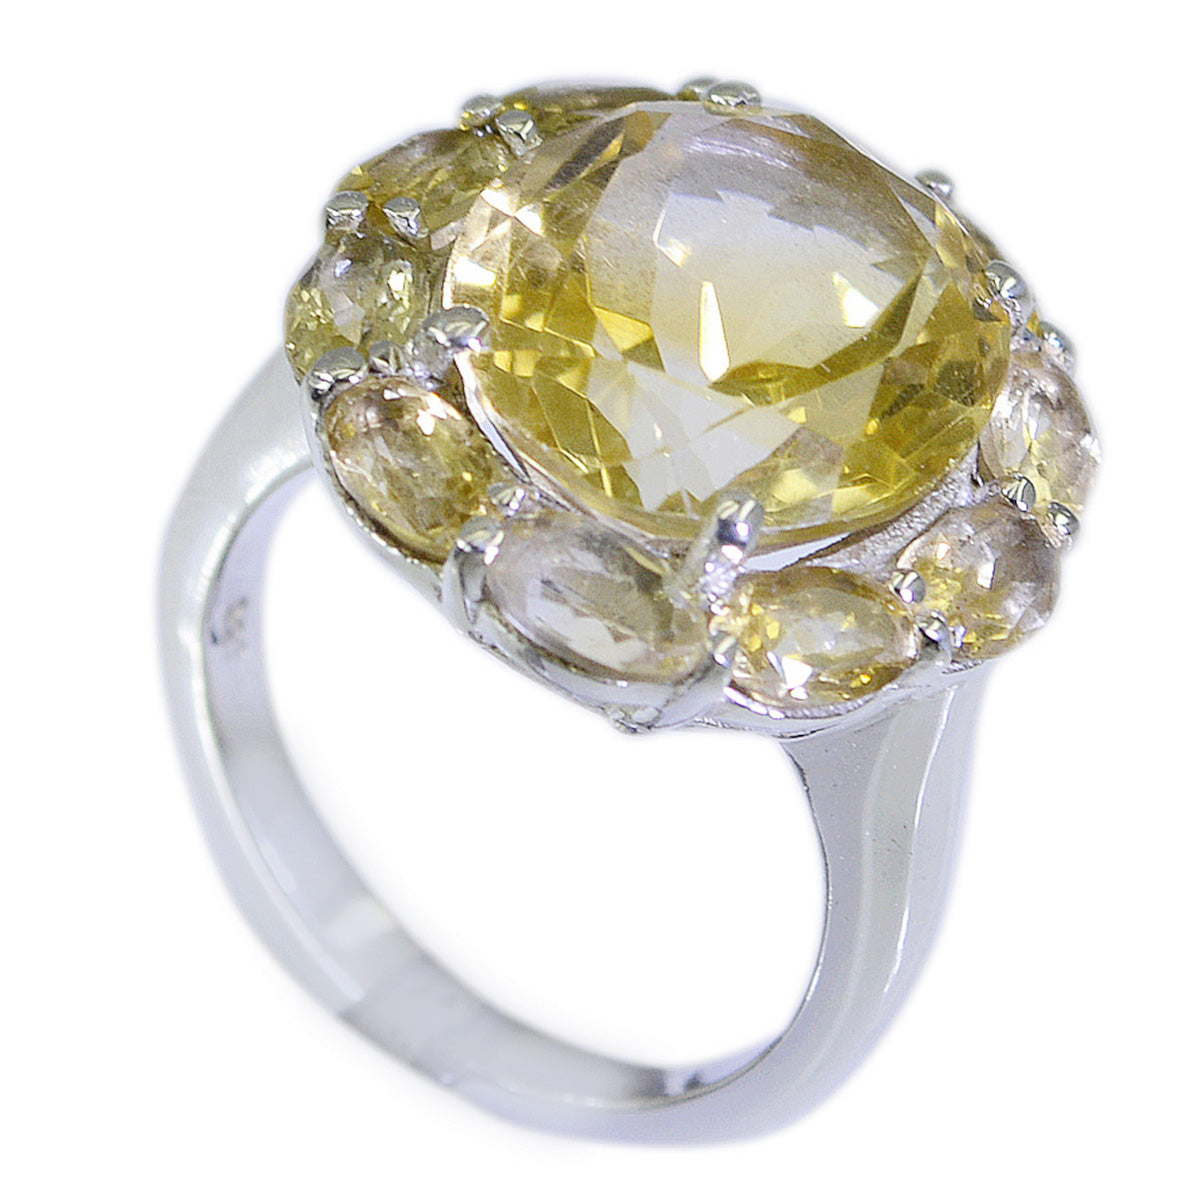 Well-Formed Stone Citrine Solid Silver Rings Swarovski Crystal Jewelry